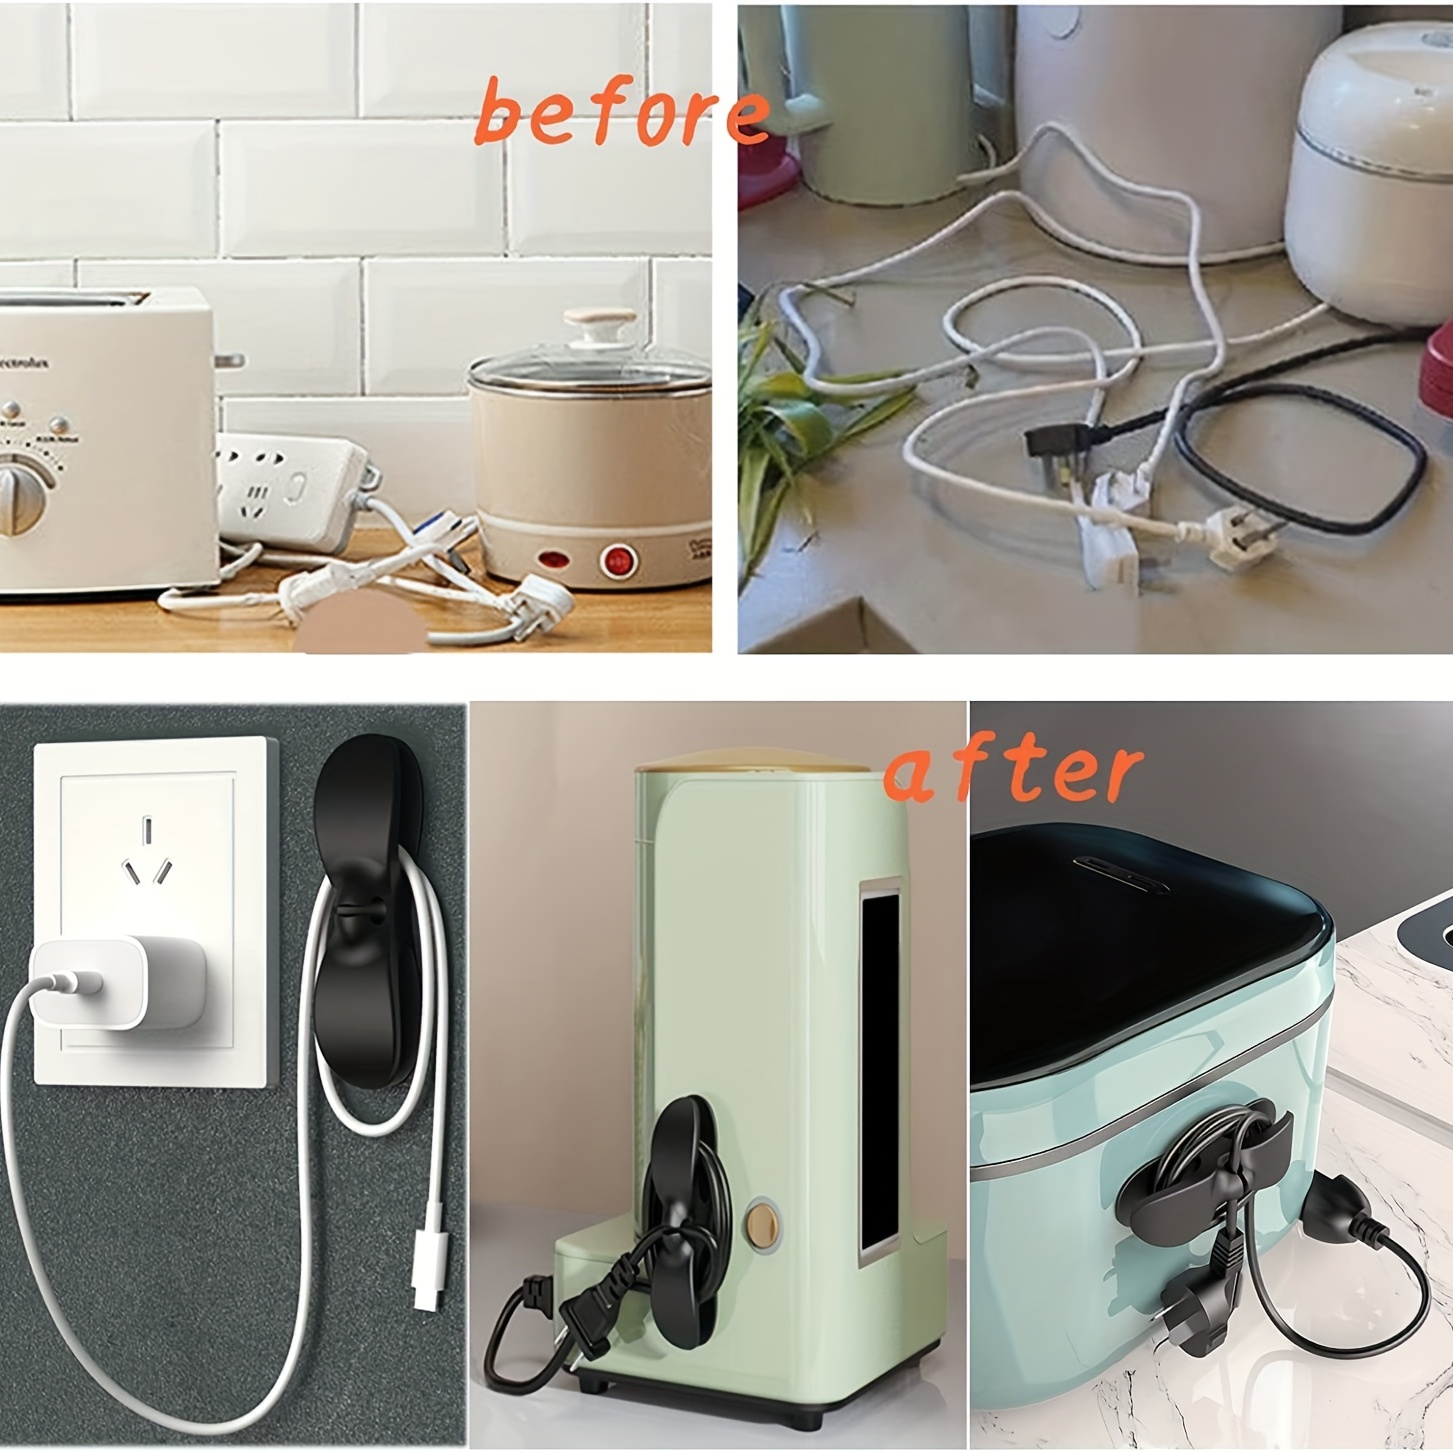 4pcs Cord Organizer for Appliances, Upgraded Kitchen Cord